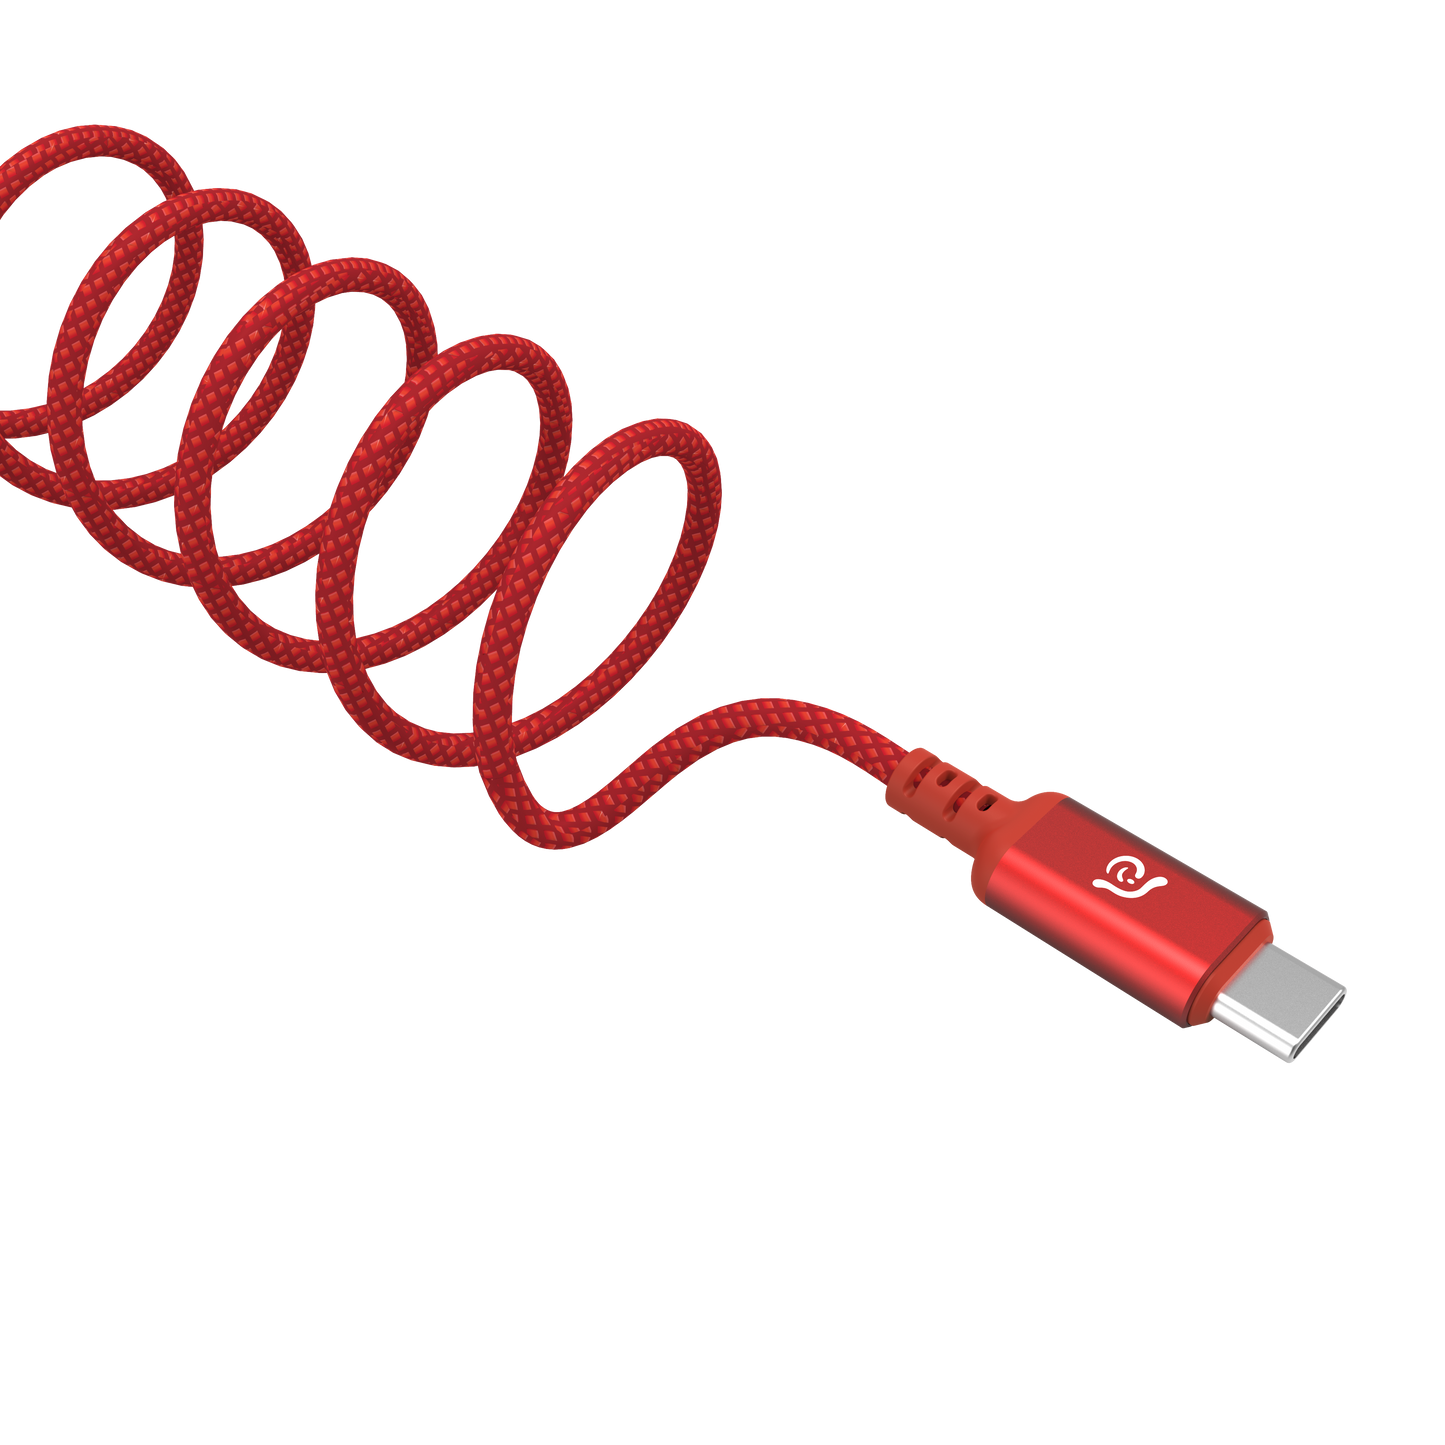 ADAM ELEMENTS CASA P120 USB-C to USB-C 240W Cable 1.2m - Red